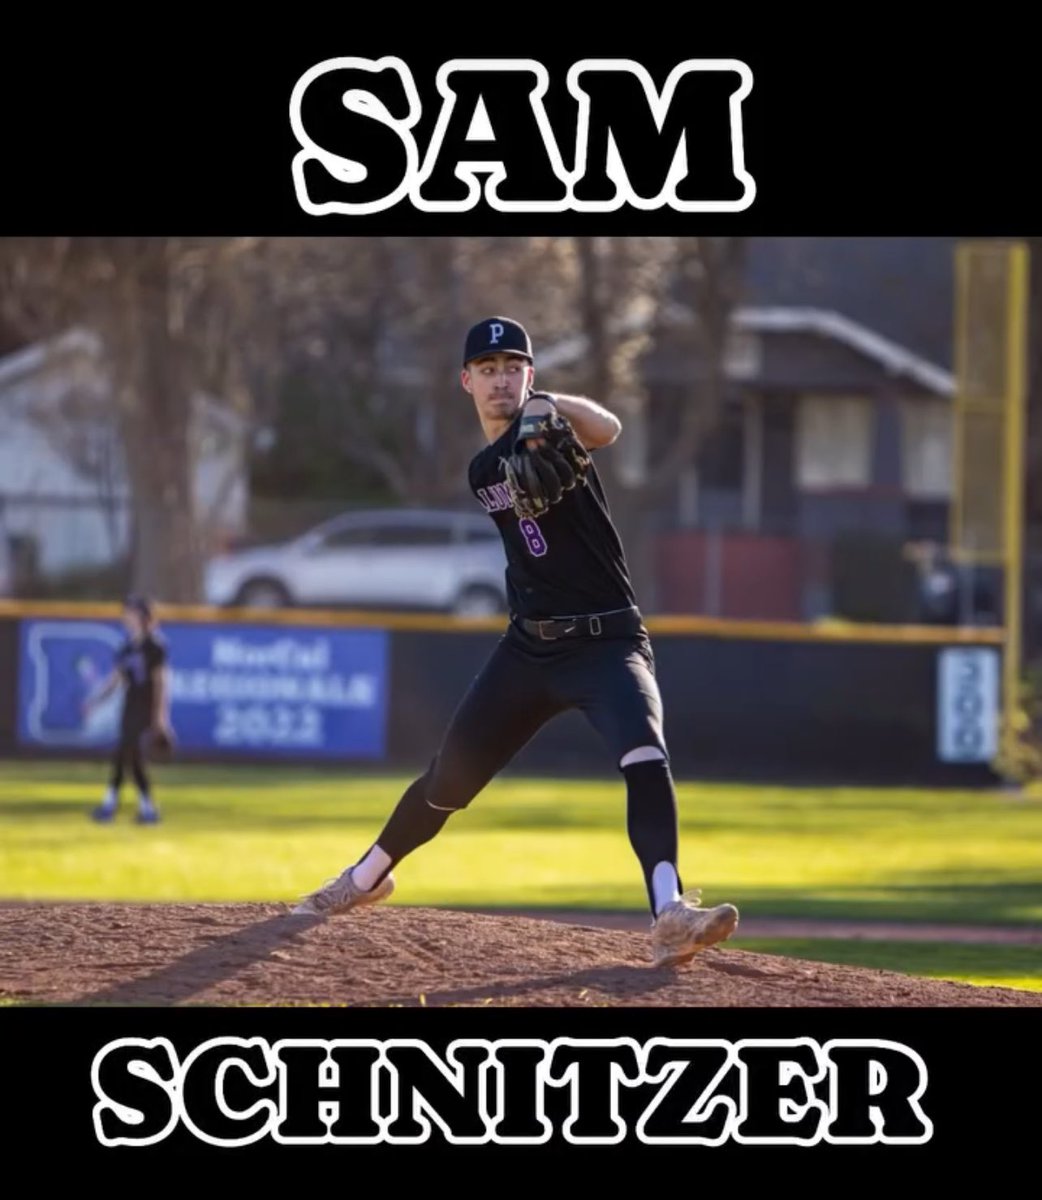 Introducing All-Star Sam Schnitzer! Known for his blazing fastball, Sam represents Petaluma High School as a hard-throwing right-handed pitcher. Can't wait to see this guy close out this game!